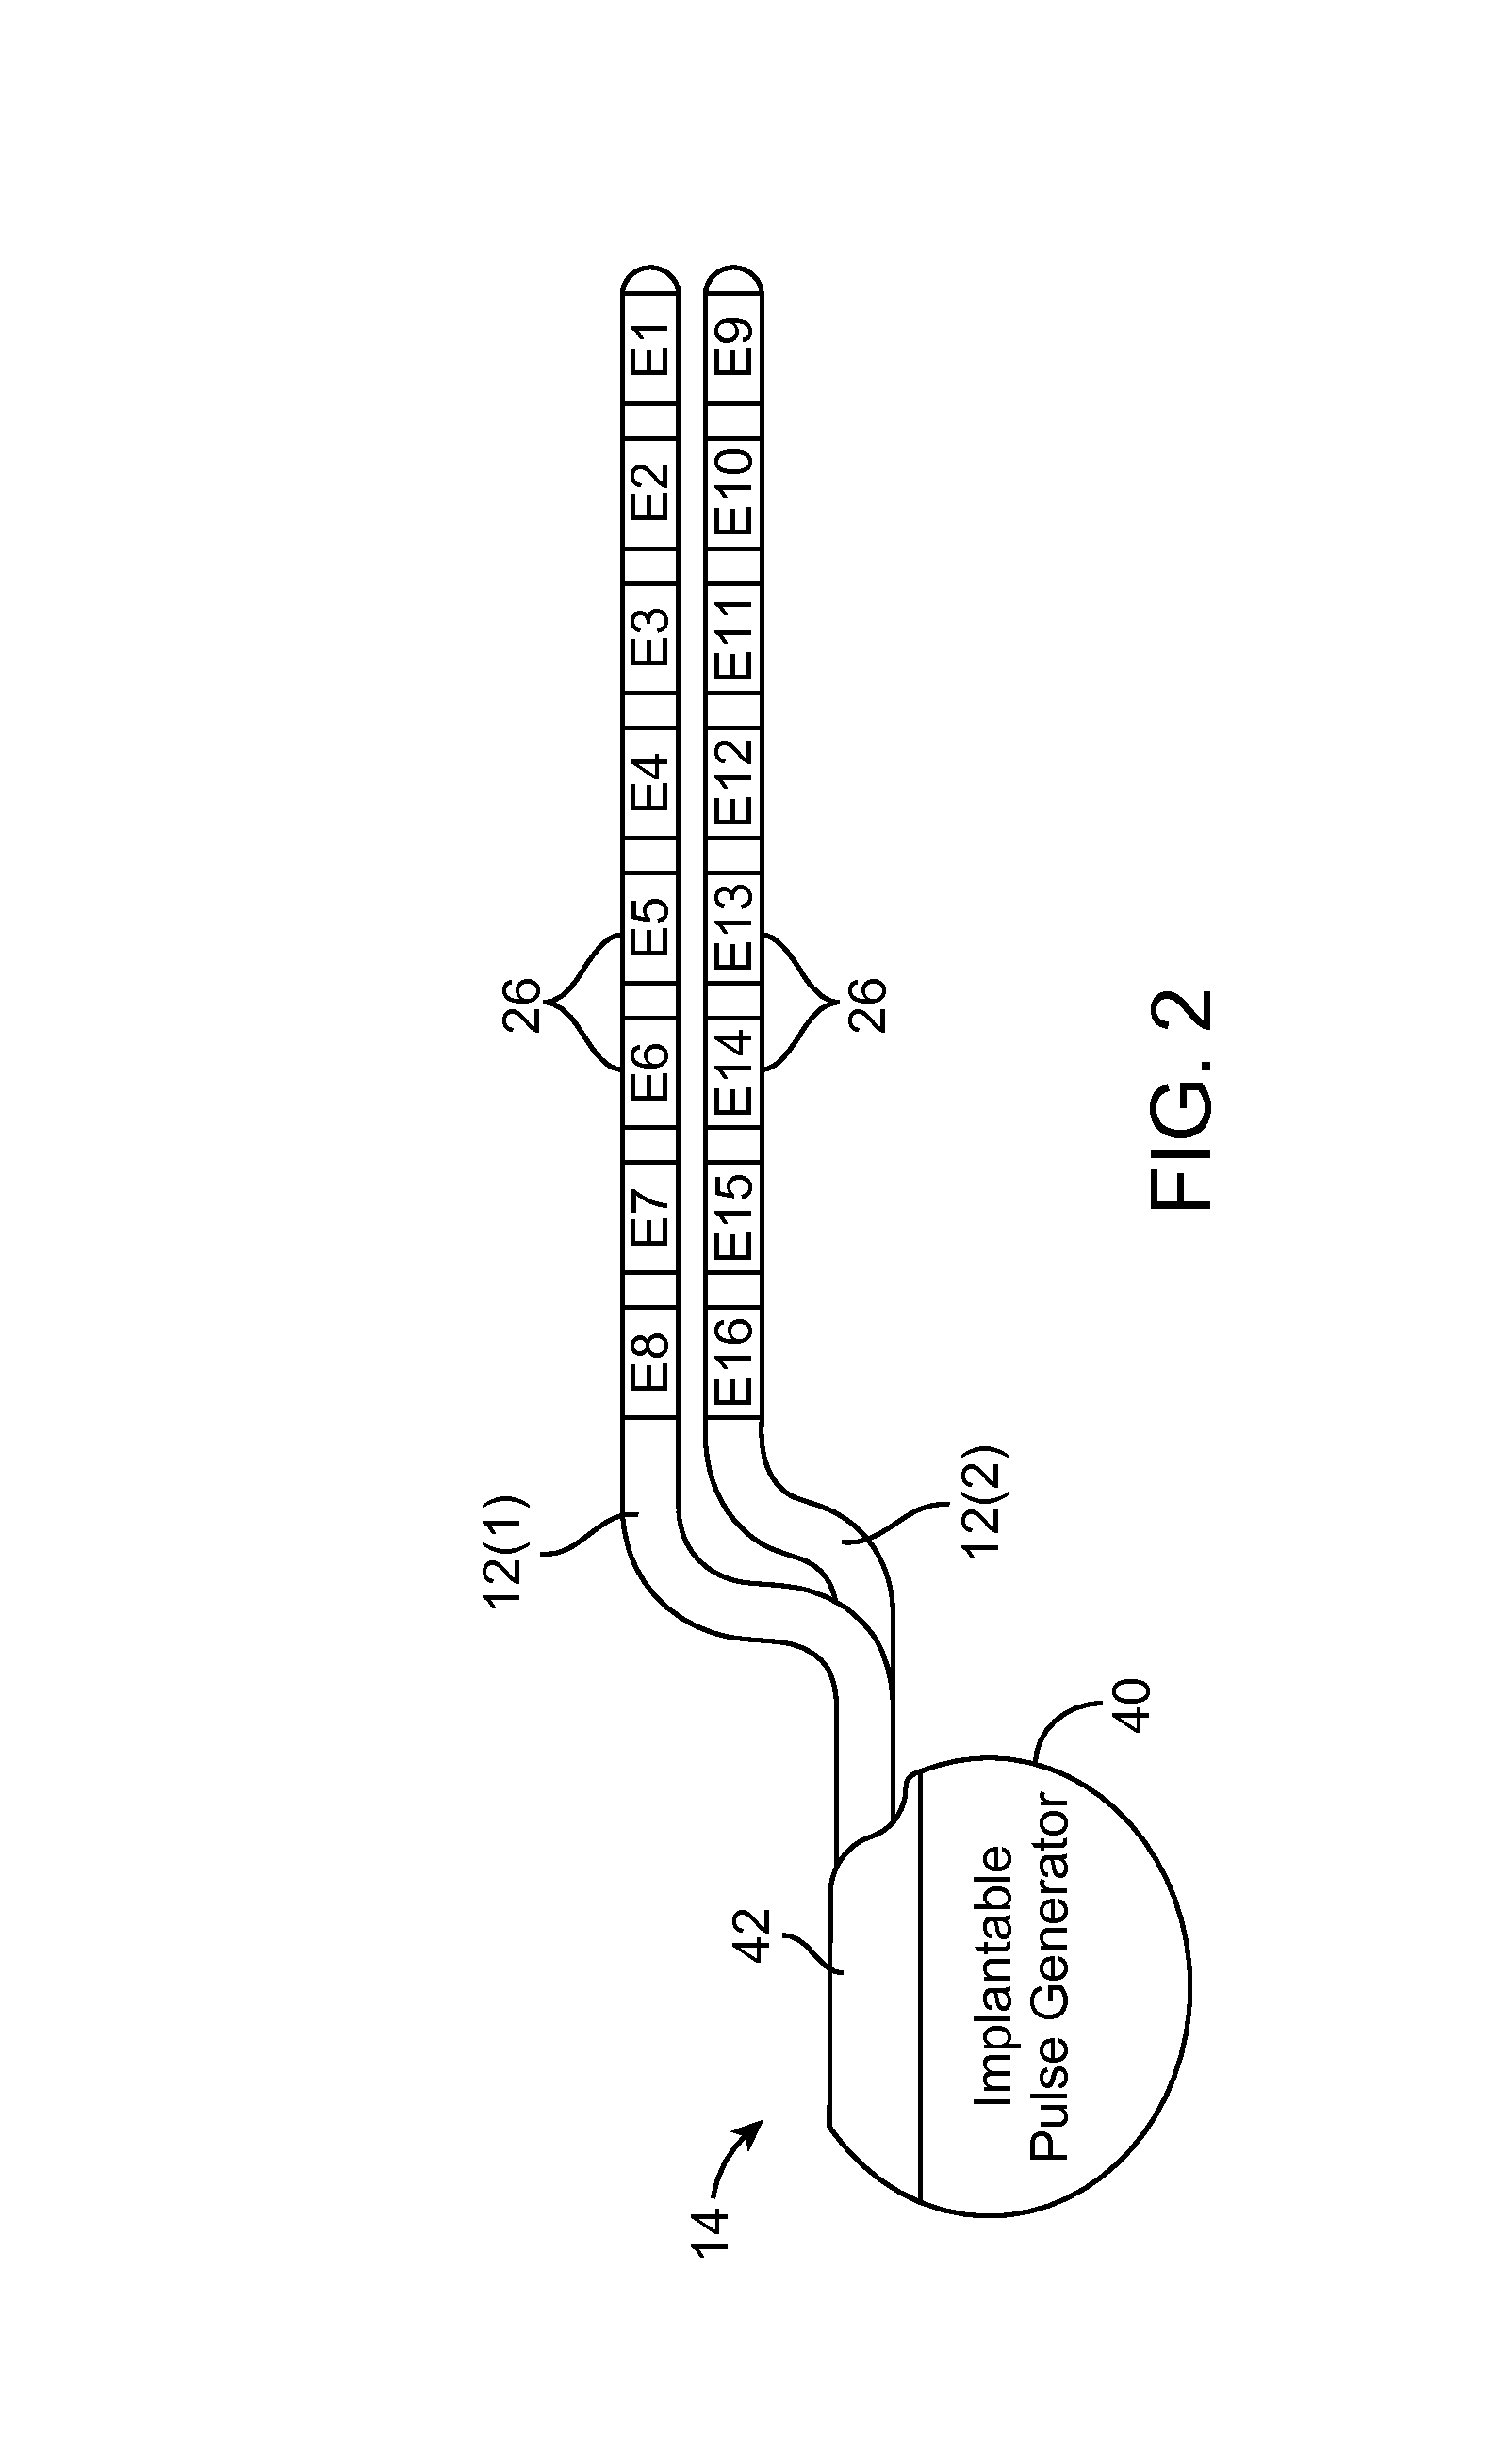 System and method for compounding low-frequency sources for high-frequency neuromodulation